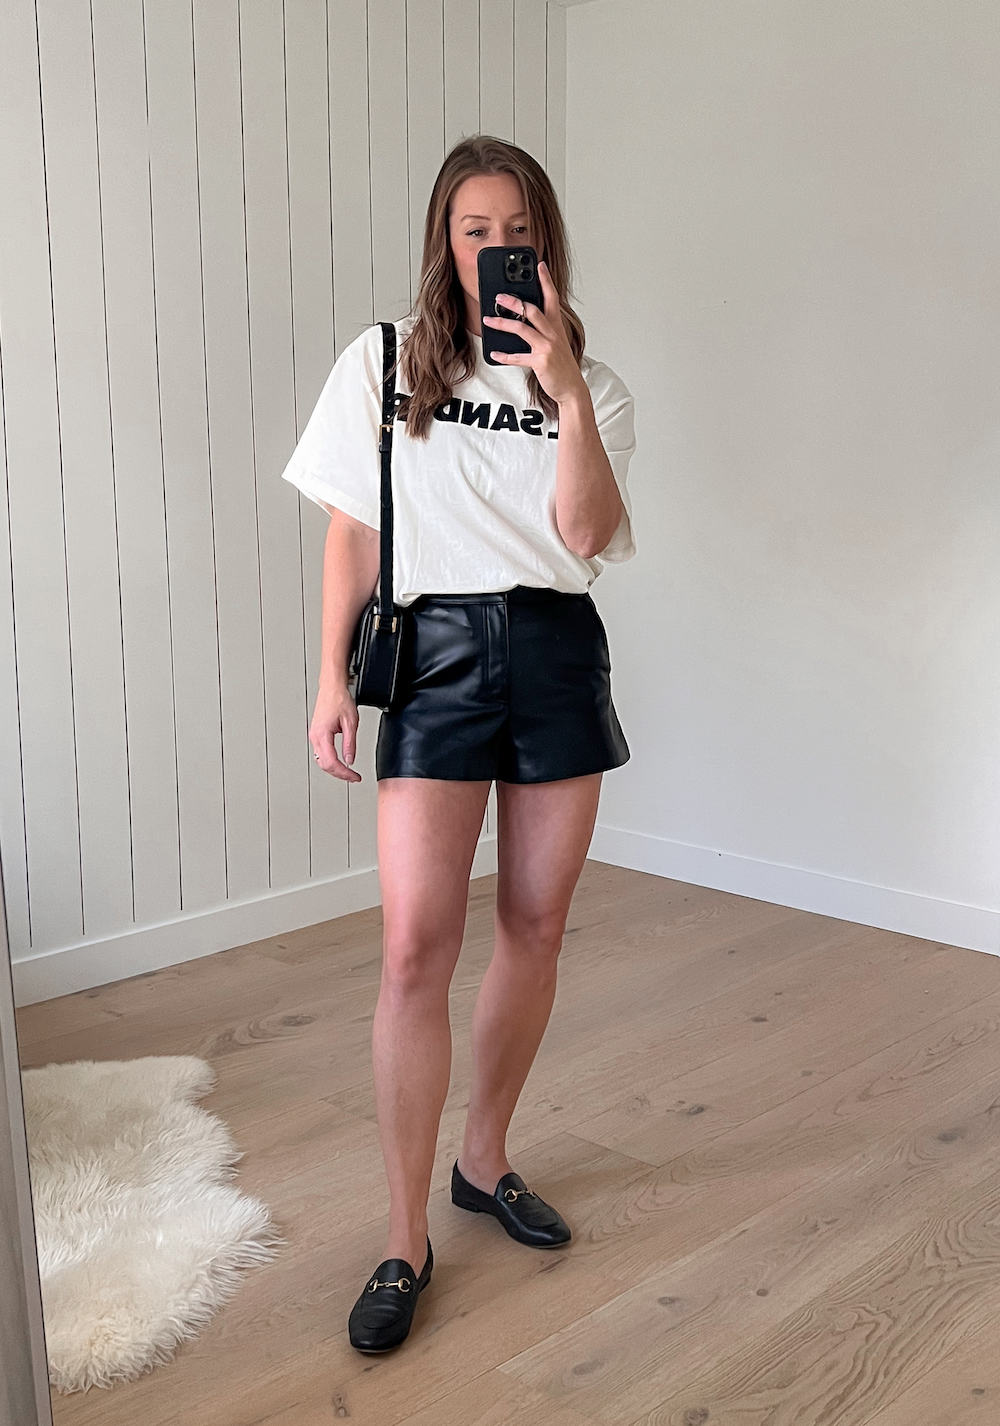 woman wearing an oversized white t-shirt with Jil Sander text and black leather shorts with black loafers